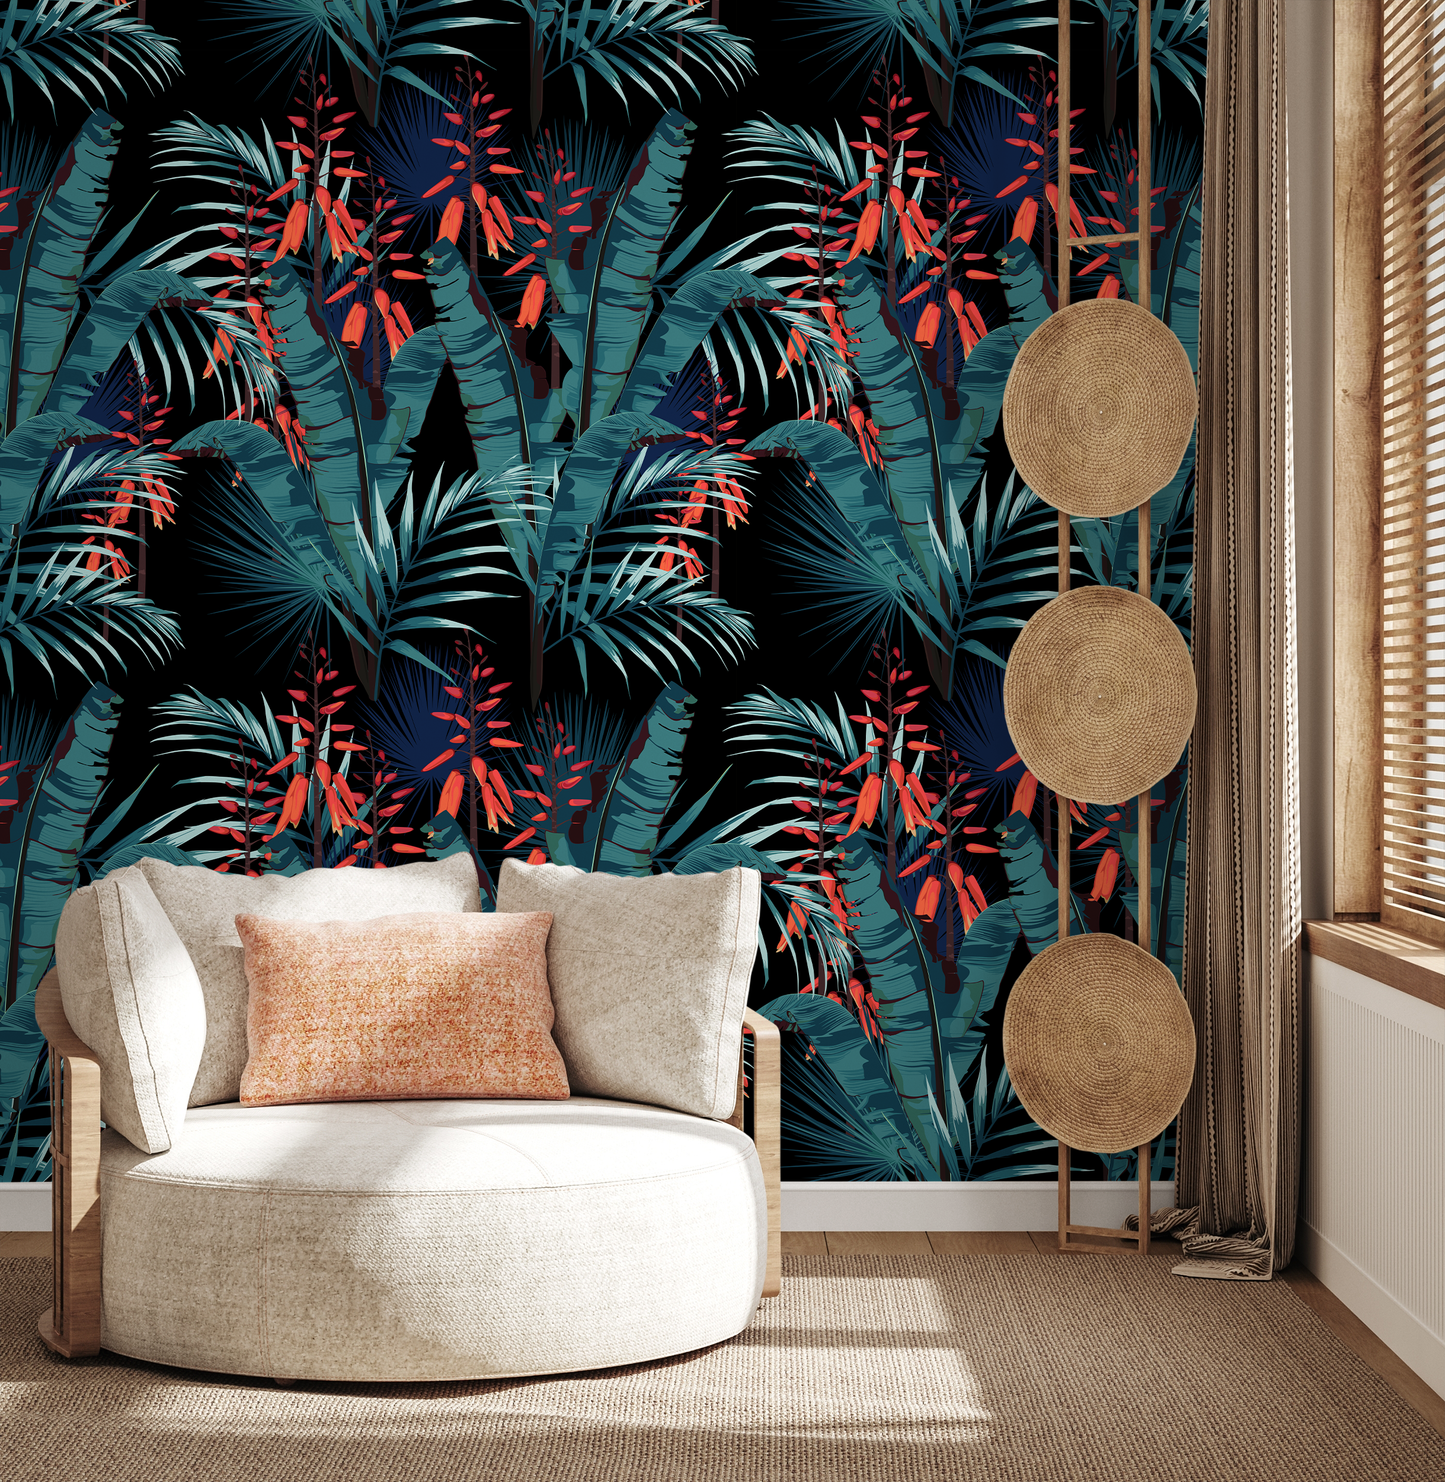 Wallpaper Peel and Stick Wallpaper Removable Wallpaper Home Decor Wall Art Wall Decor Room Decor / Tropical Palm Leaves Wallpaper - B143